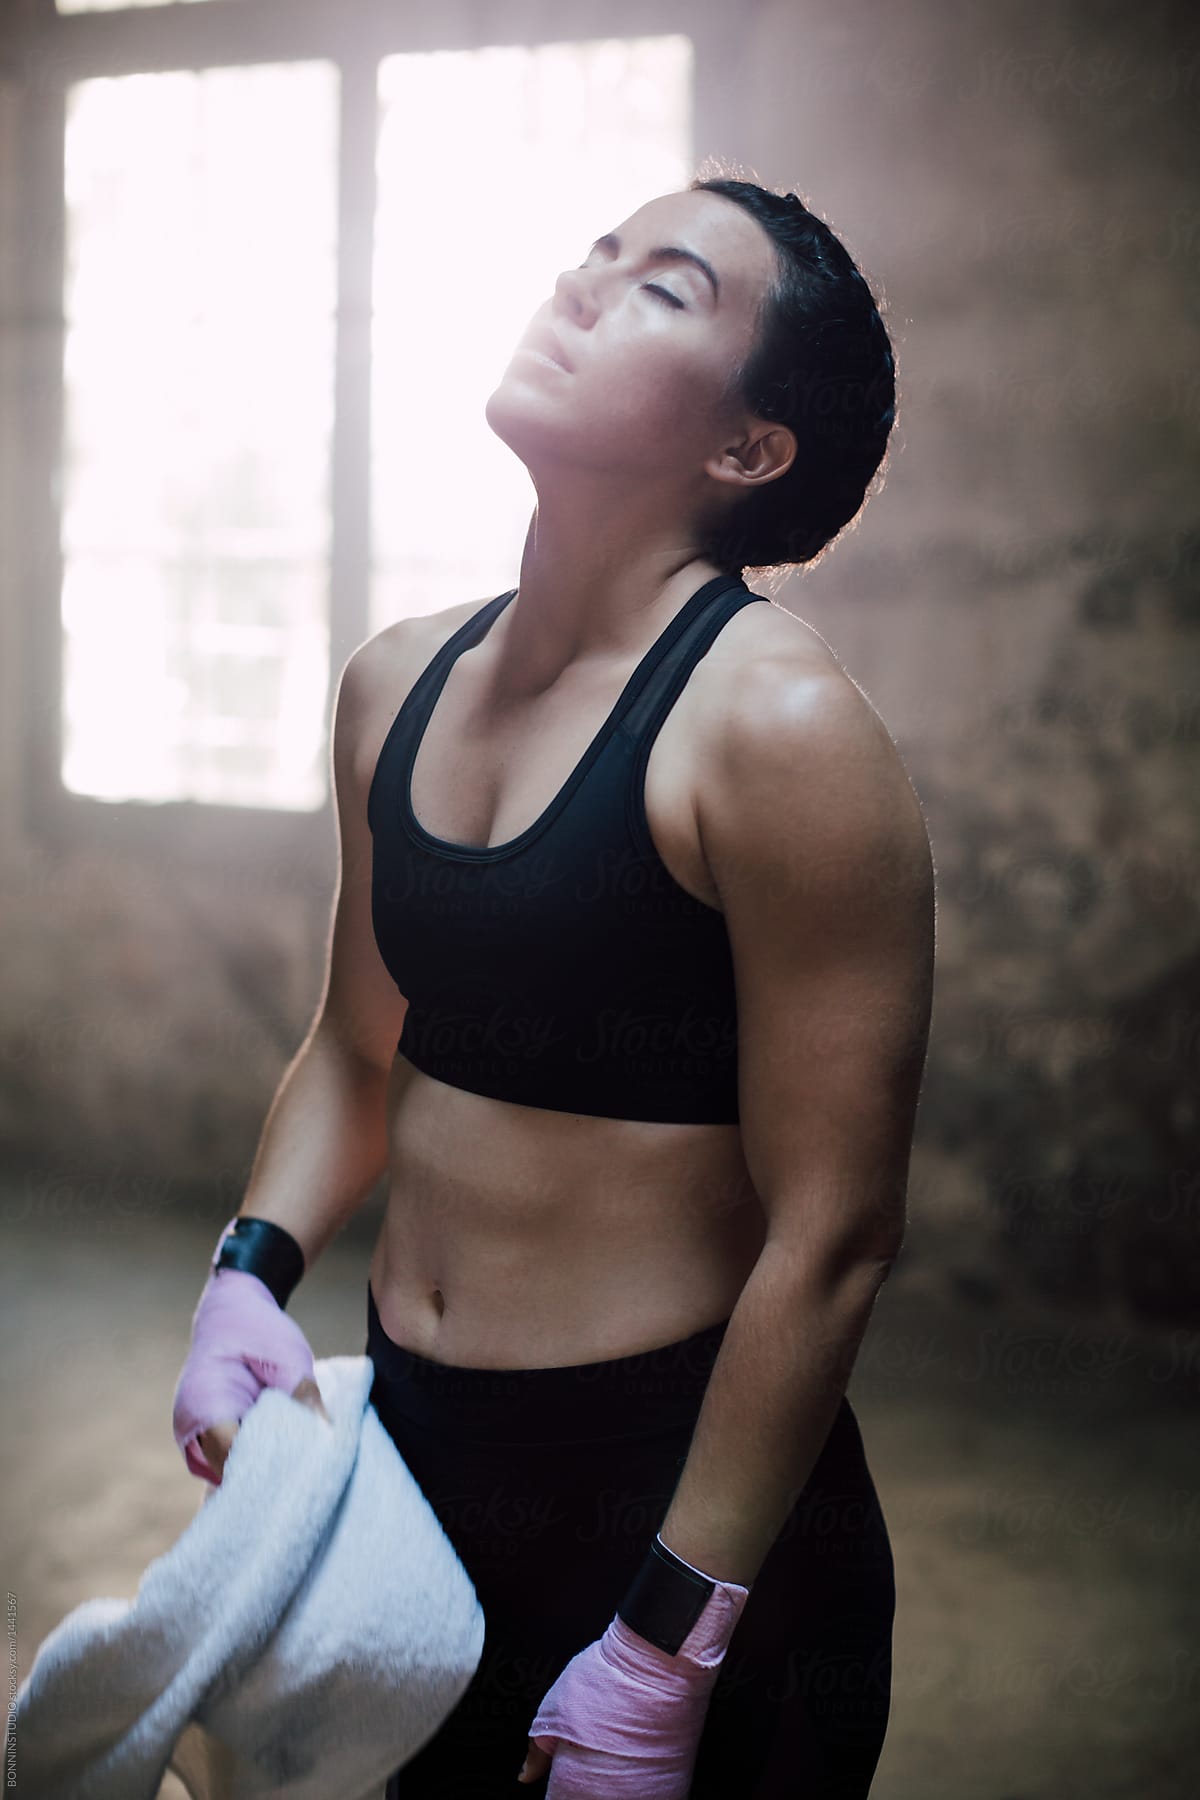 Woman Putting On Her Sport Bra Before Exercise by Stocksy Contributor  Take A Pix Media - Stocksy